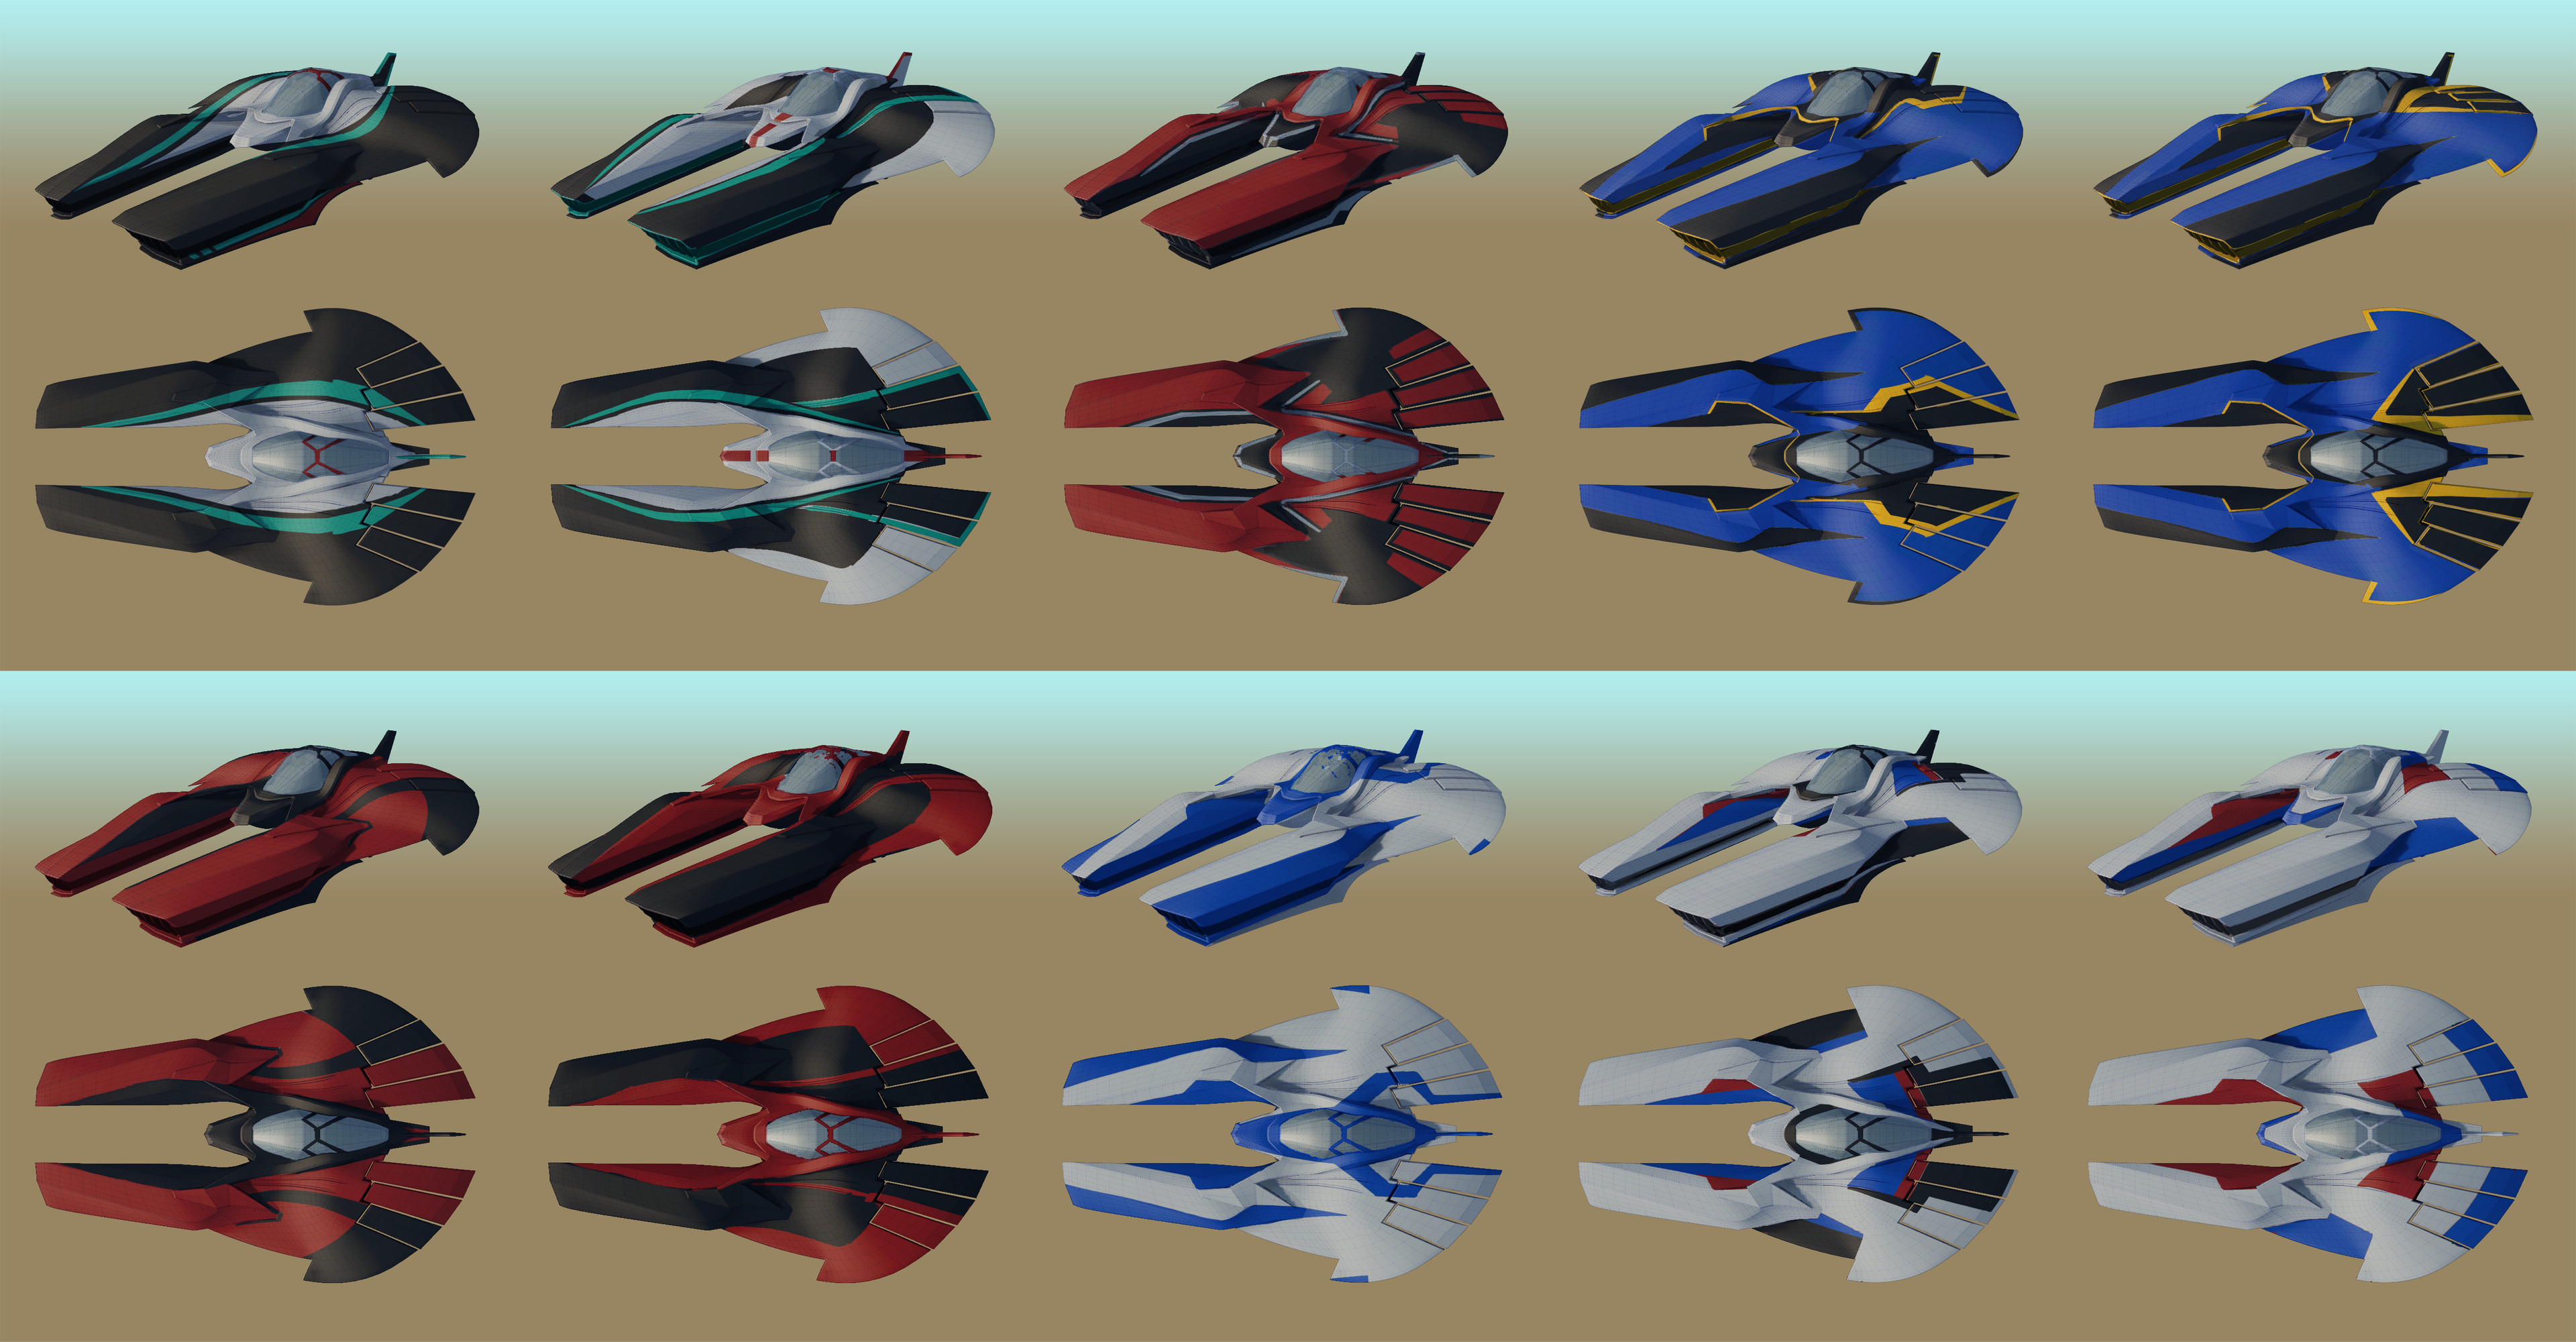 Livery options for the speeder with some quick paint-overs in photoshop. Was looking at 2-tone sports car reference.